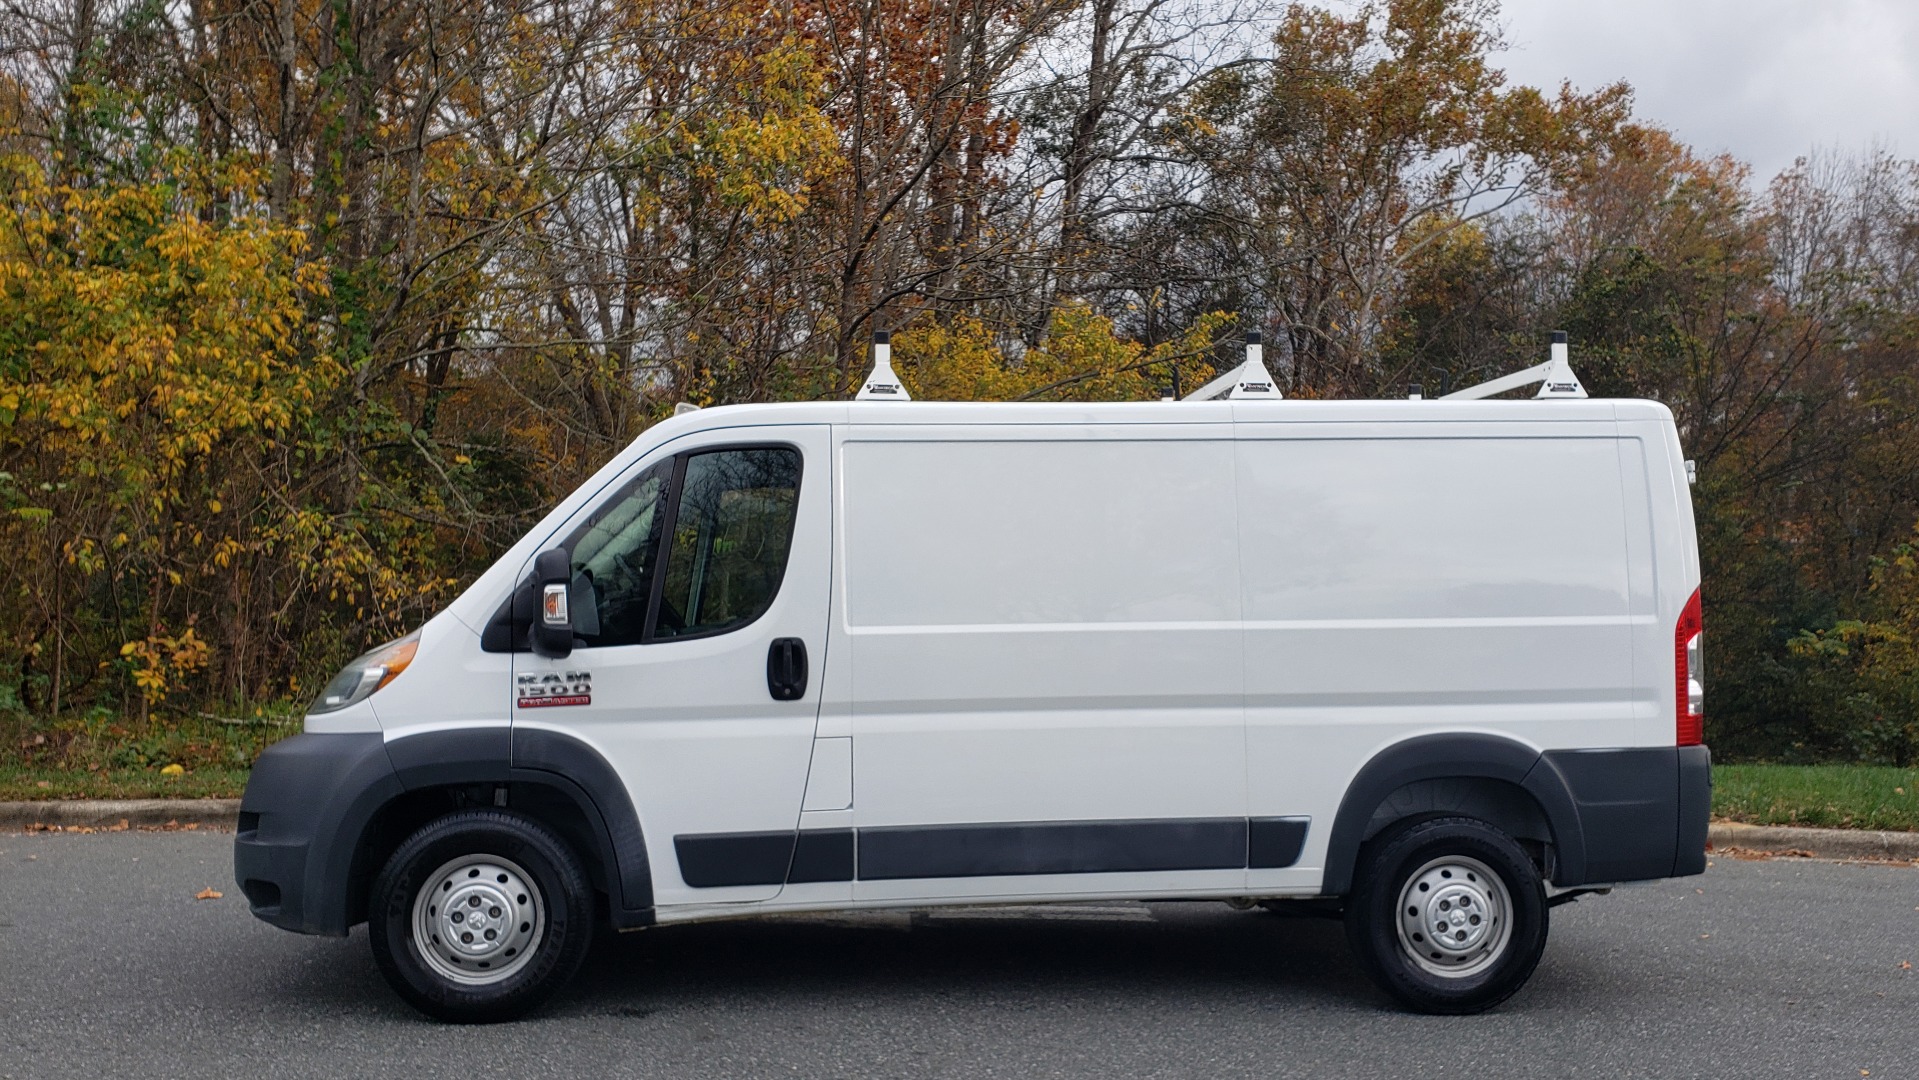 Used 2015 Ram PROMASTER CARGO VAN 136-INCH WB / LOW ROOF / LADDER RACK / INSIDE RACKS for sale Sold at Formula Imports in Charlotte NC 28227 2